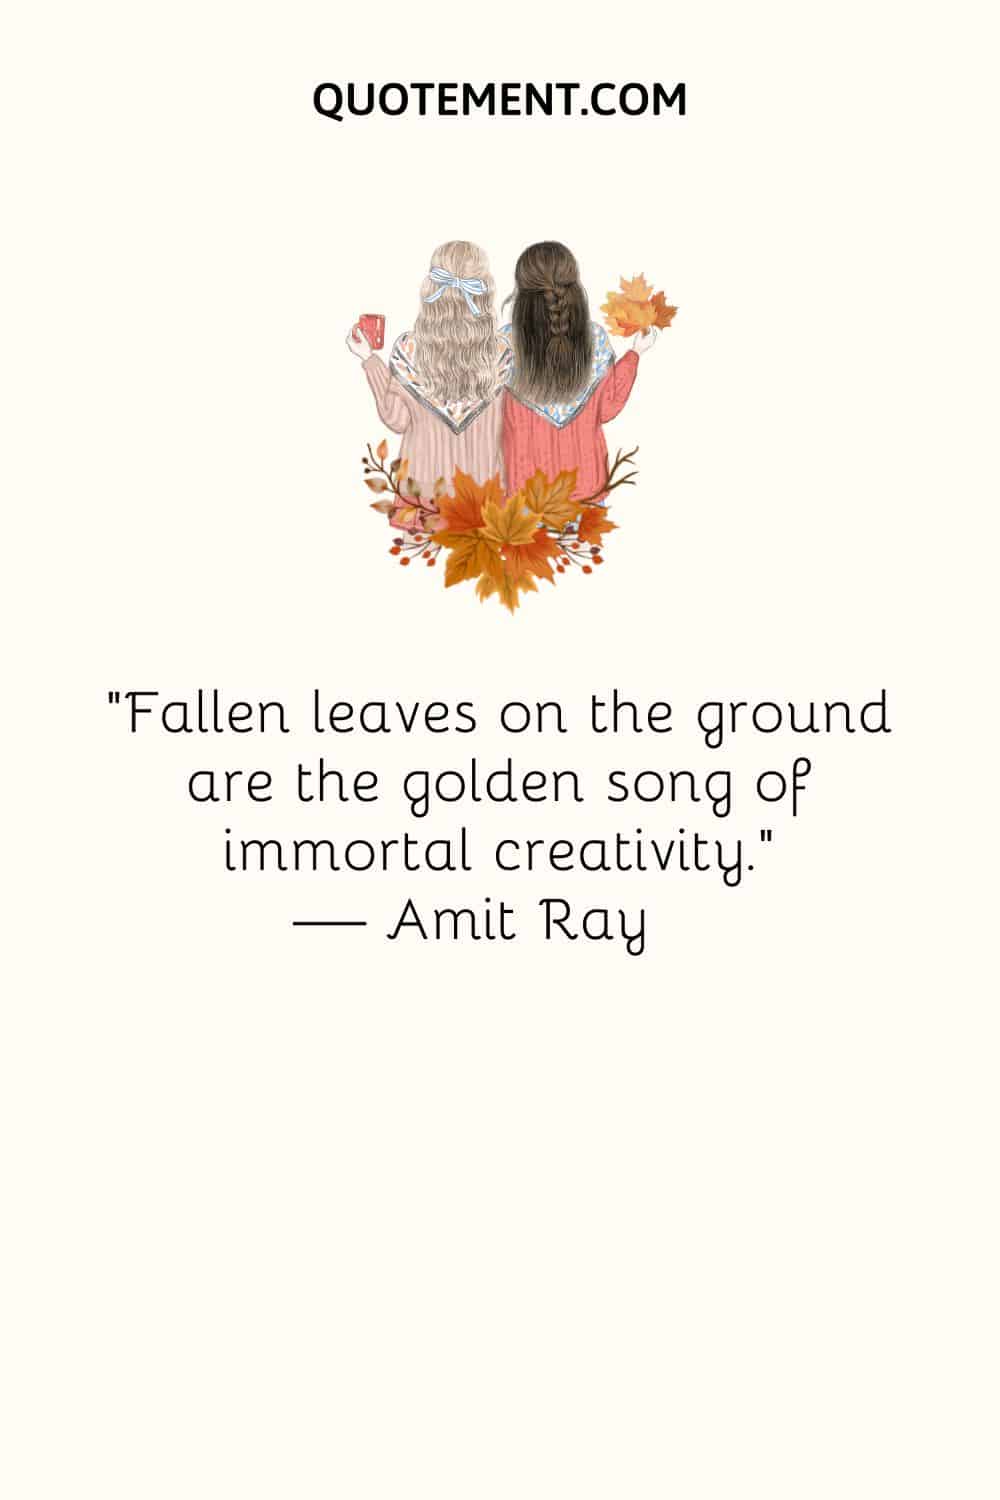 Fallen leaves on the ground are the golden song of immortal creativity. — Amit Ray